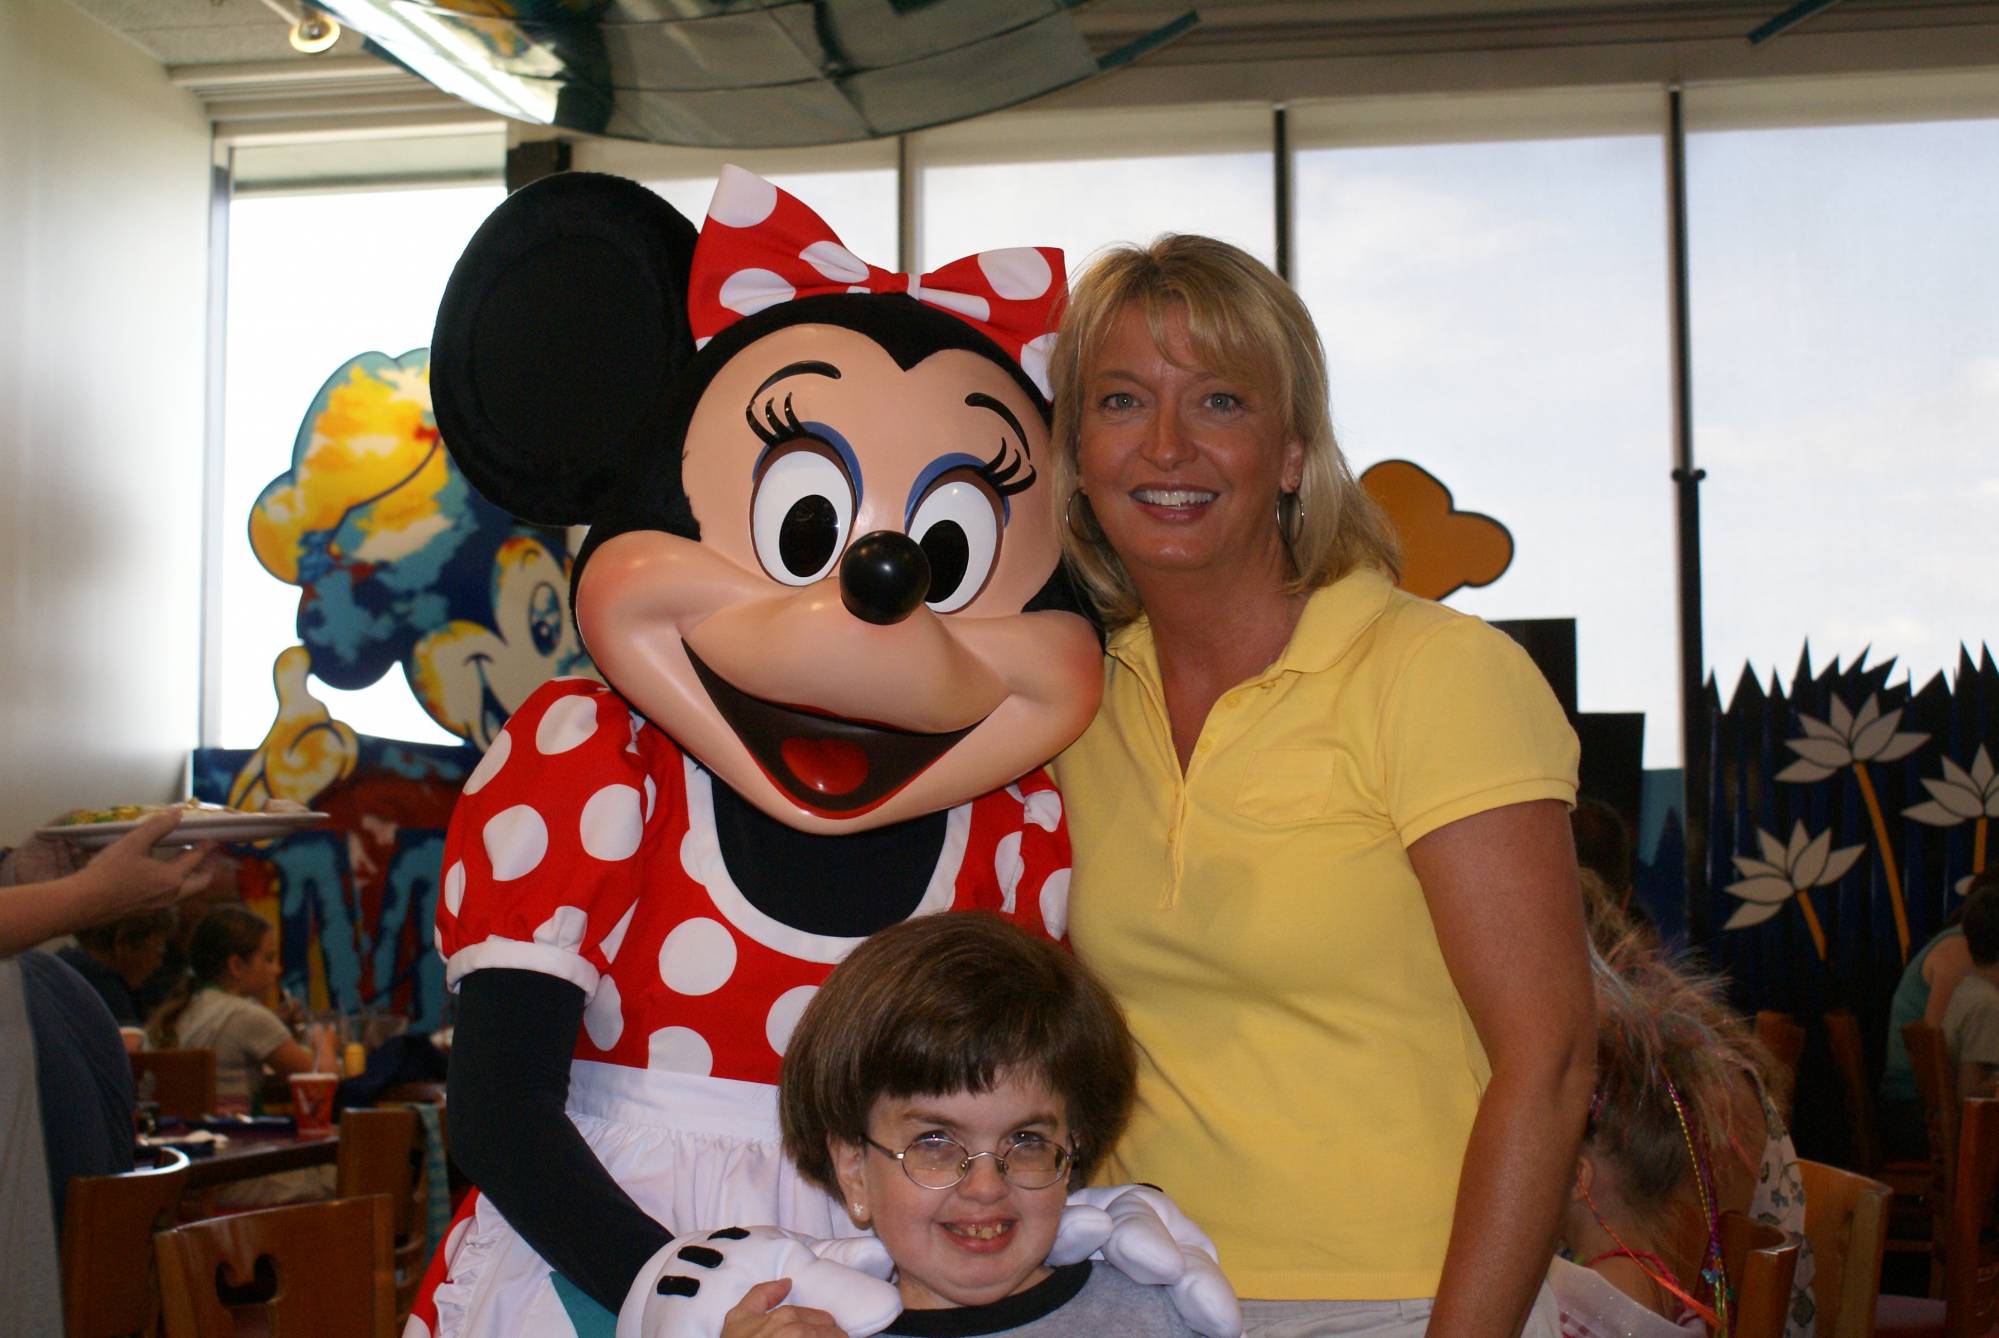 Smiling with Minnie